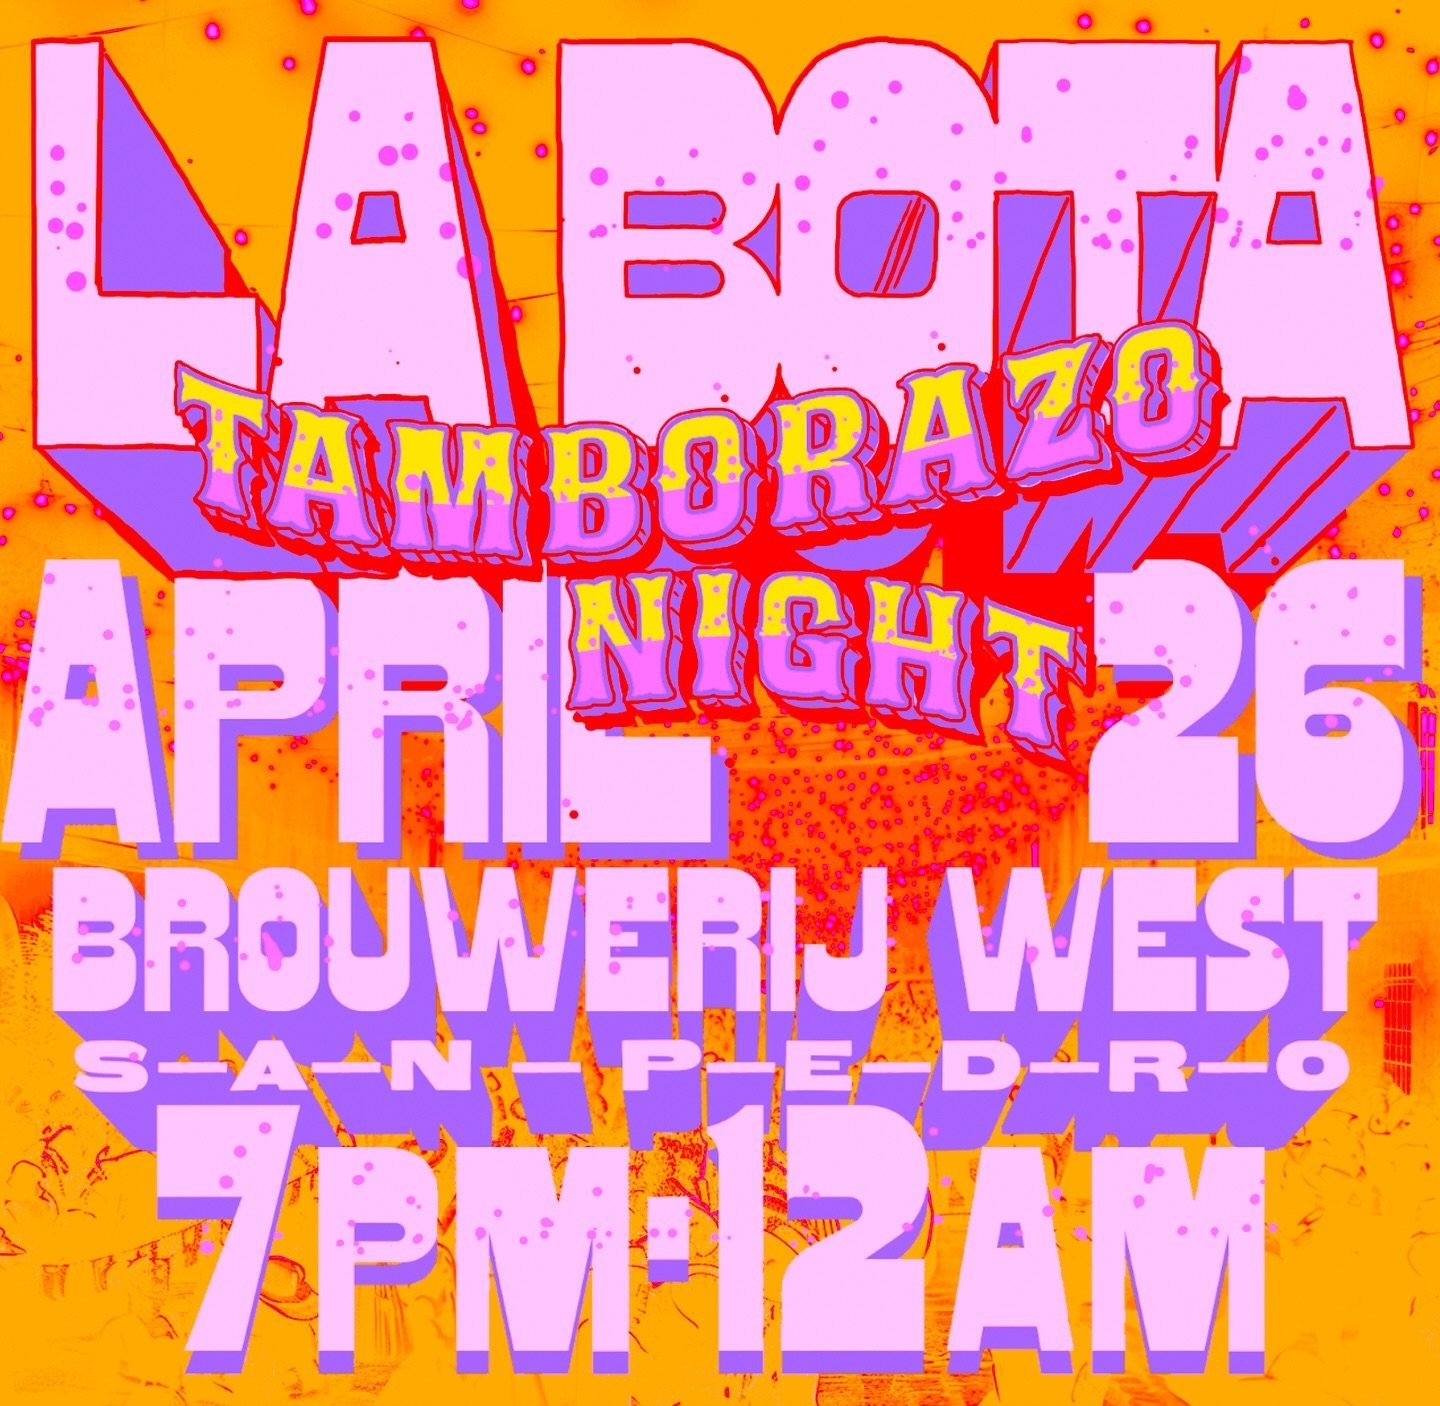 👢 LA BOTA - TAMBORAZAO - is NEXT FRIDAY, and TICKETS ARE ON SALE NOW 🎟️ These events have been selling out, so DO 👏 NOT 👏 WAIT 👏 to get your tickets for only $10 (limited pre-sale price + taxes &amp; fees). Doors open and music starts at 7pm 💃 